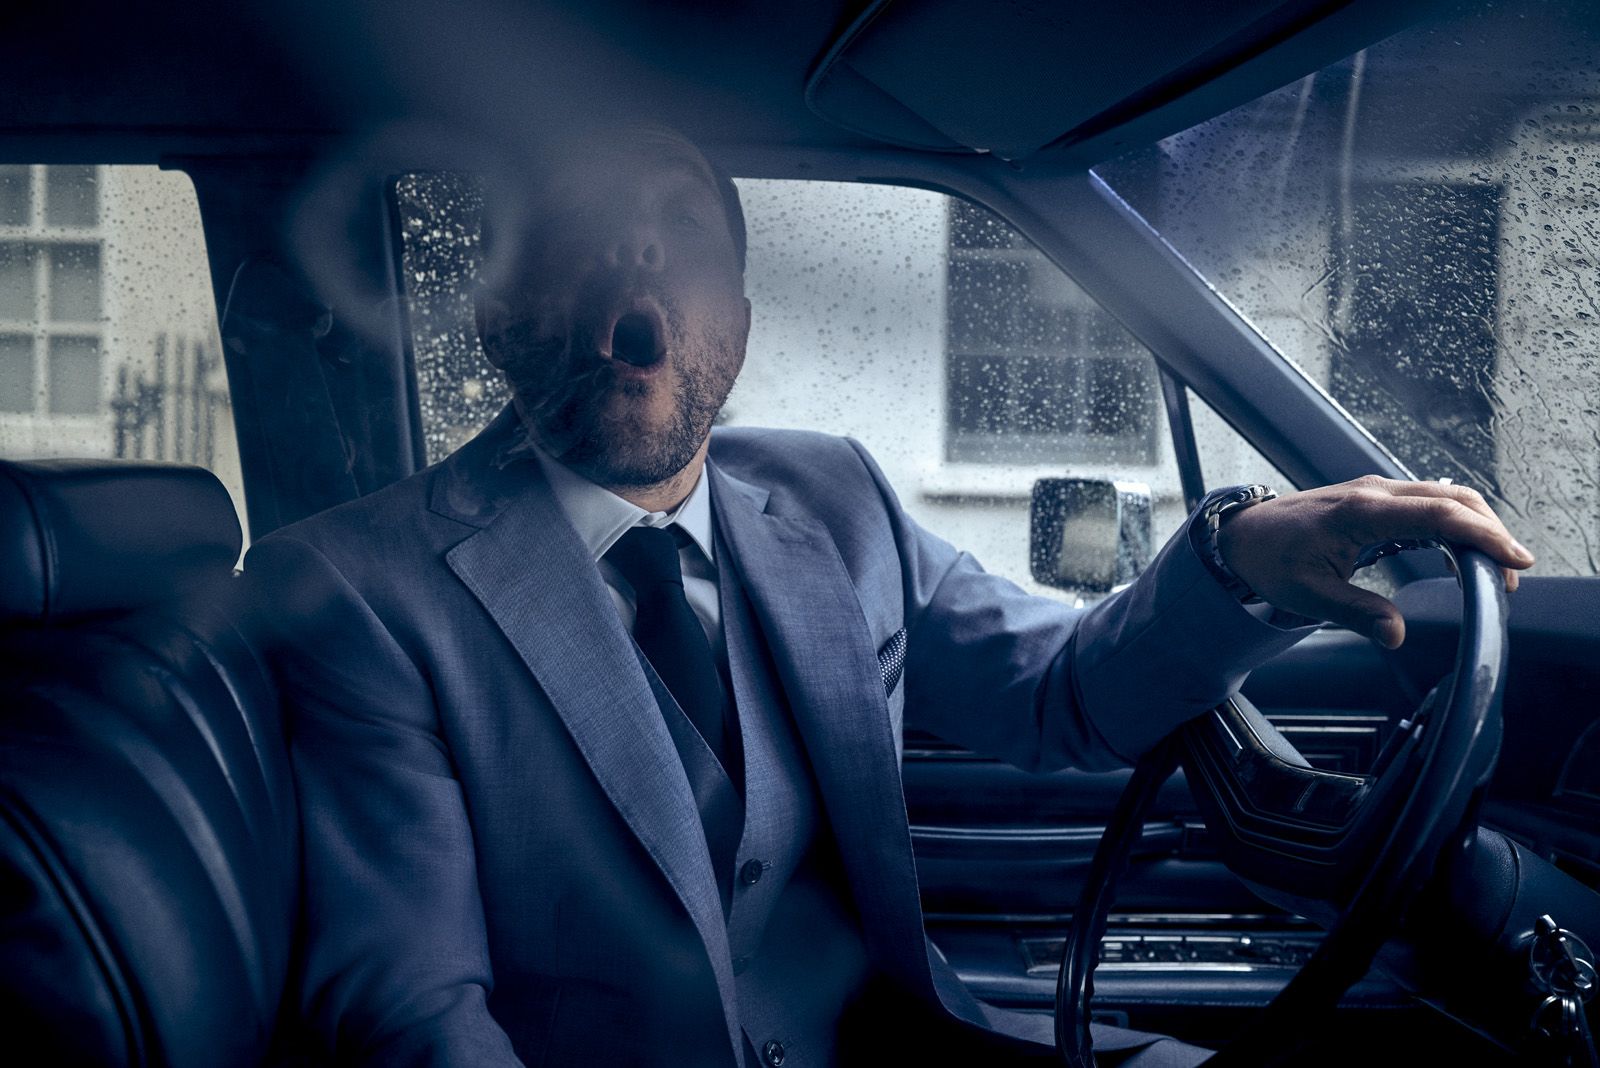 stephen graham photographed for the cover of esquire spain by charlie gray